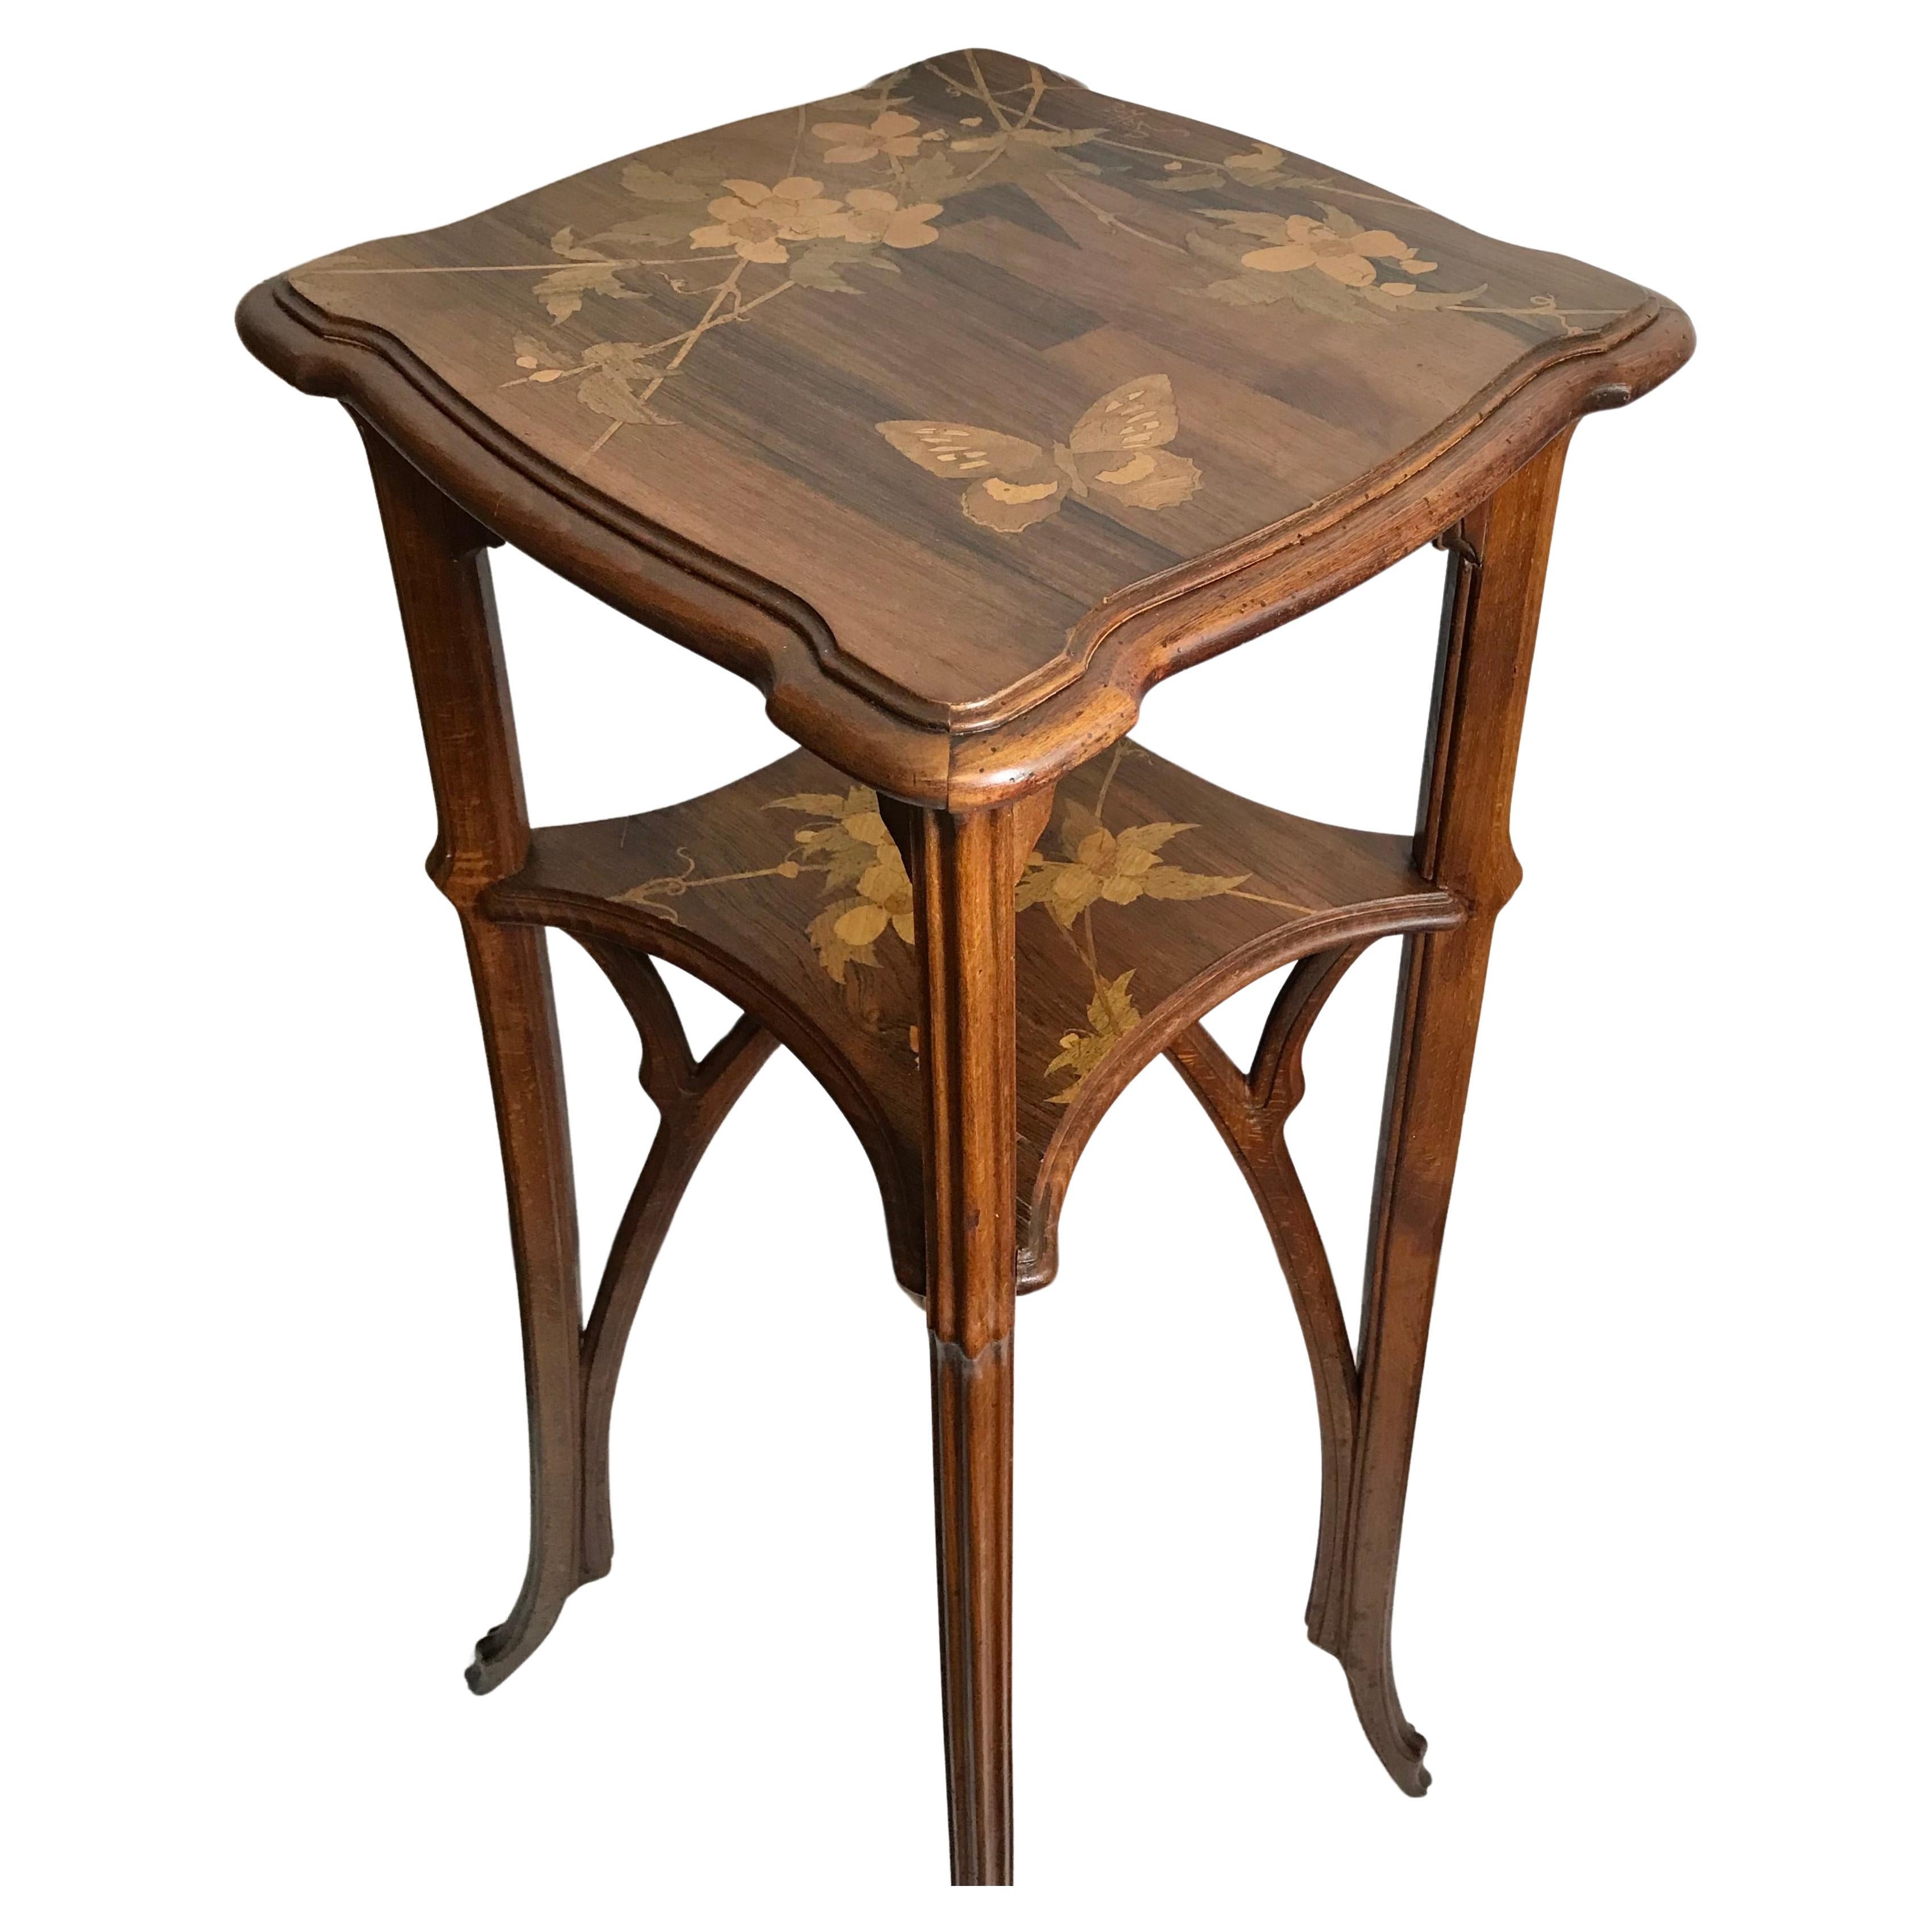 Early 20th Century Emile Galle Marquetry Two Tiered Walnut and Fruitwood Table For Sale